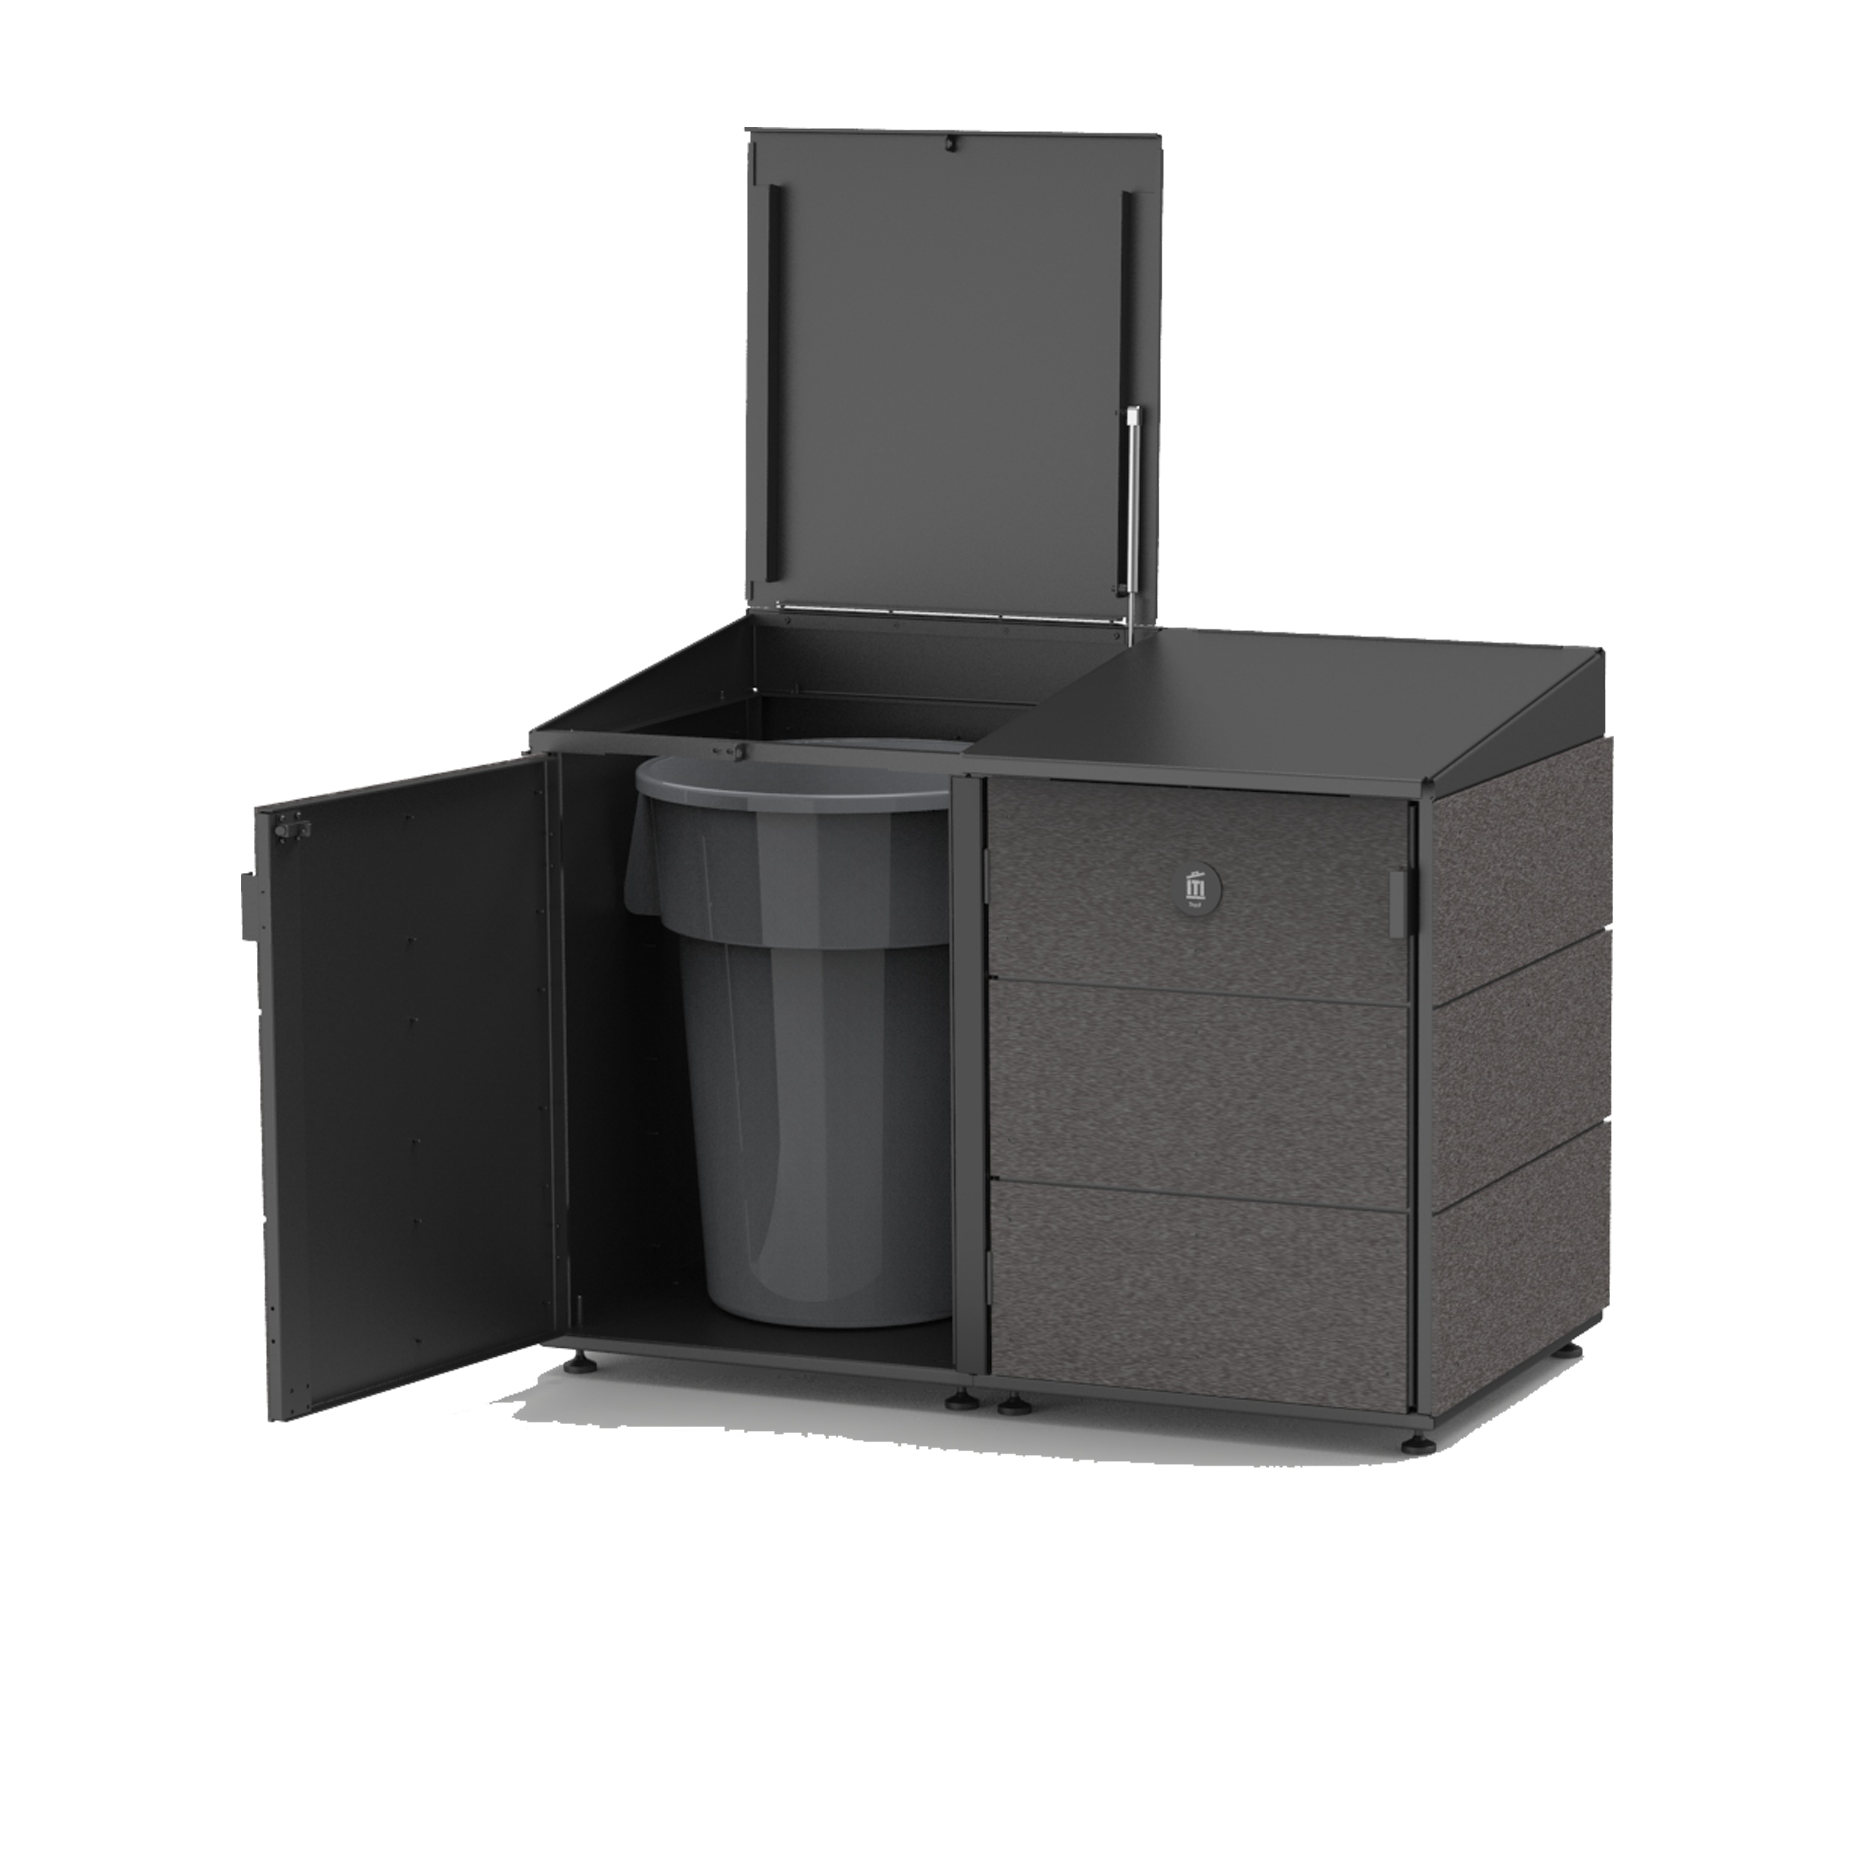 Outdoor Trash or Recycle Cart Garage - Solid Body or with Panels – Securr™